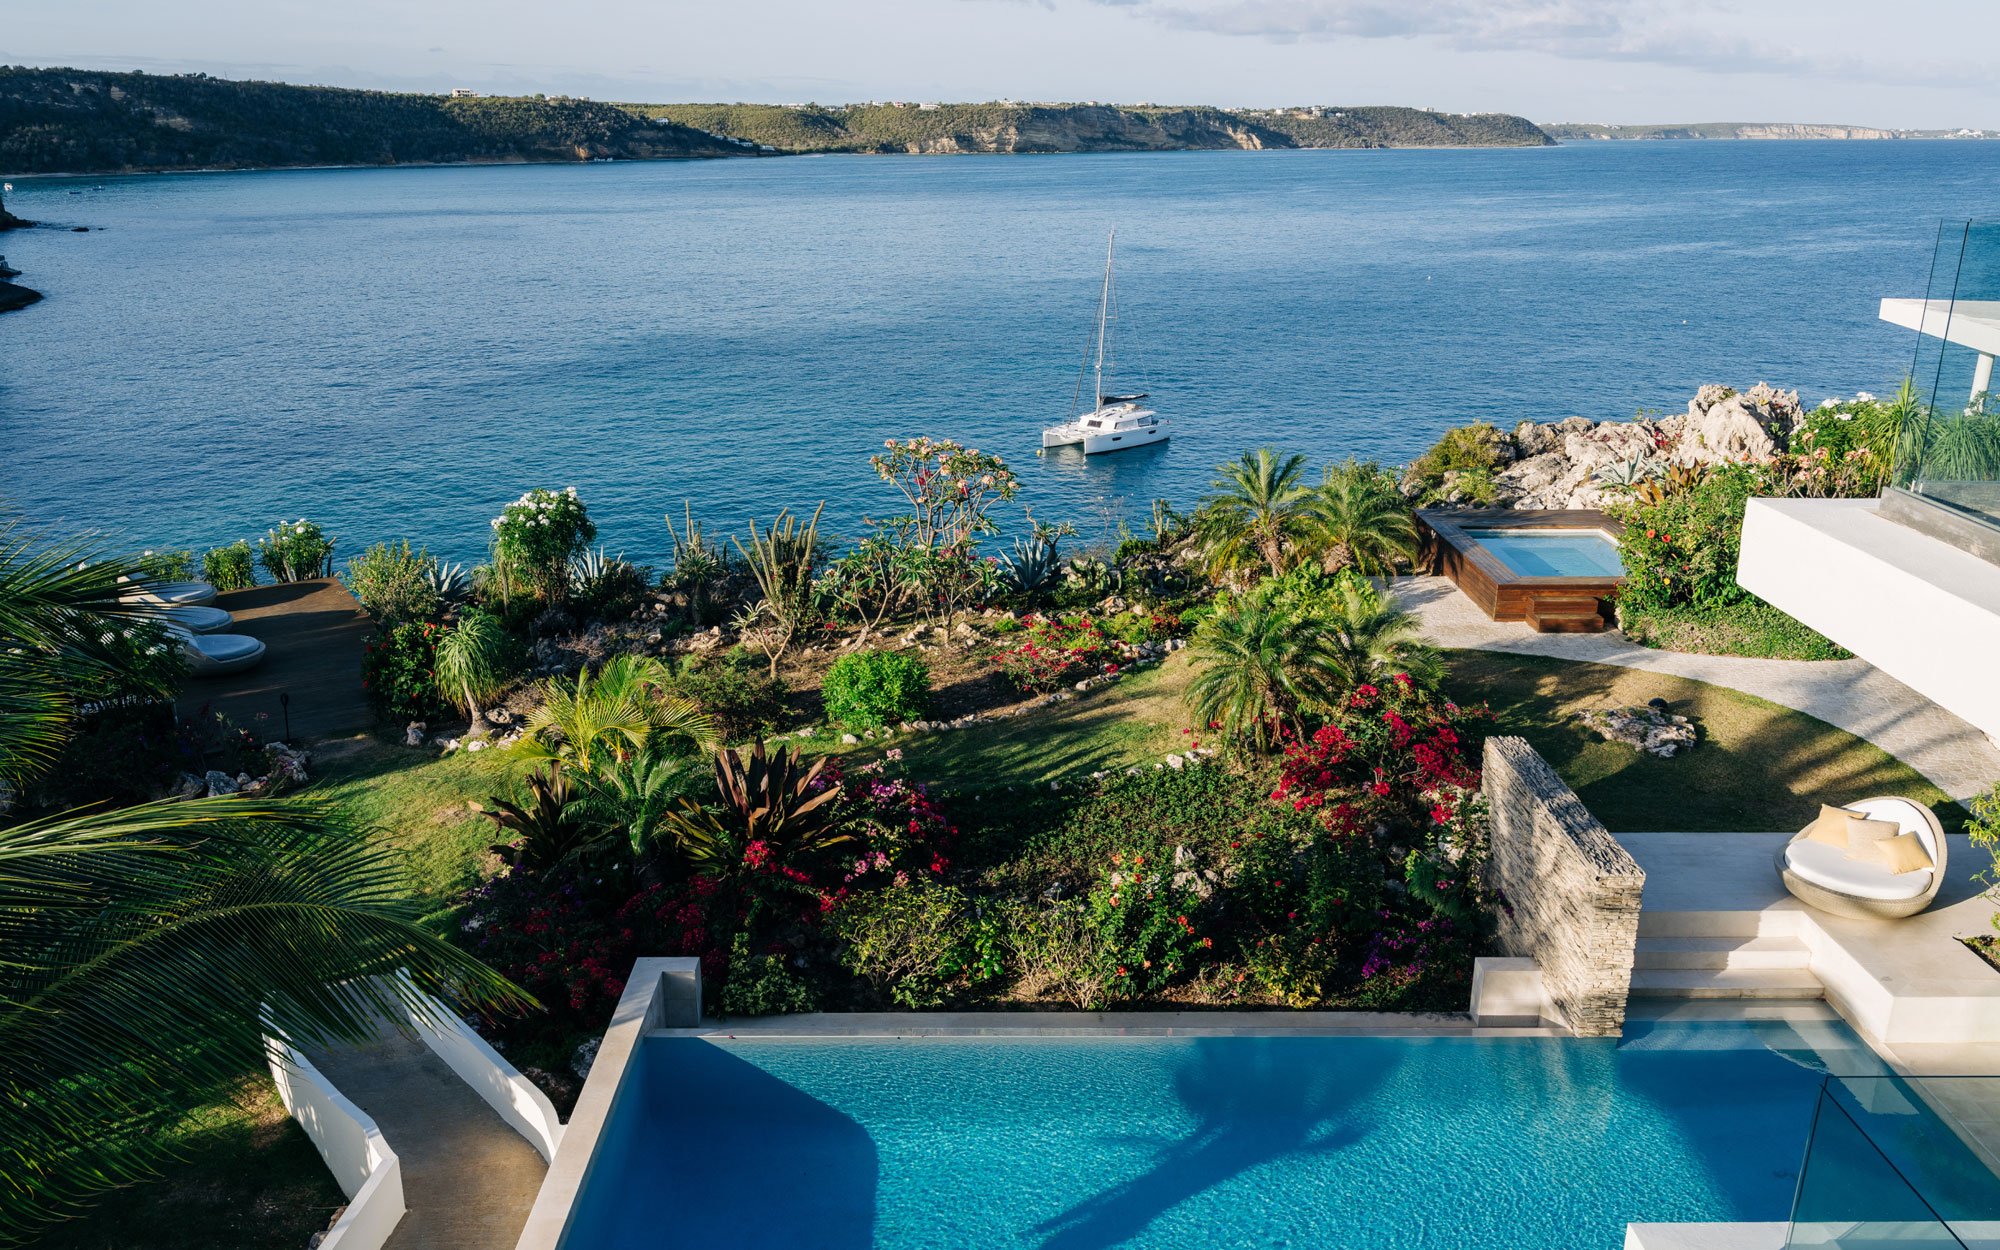 ANI Anguilla summer vacation rentals comprises of 2 villas with ocean view and private pools